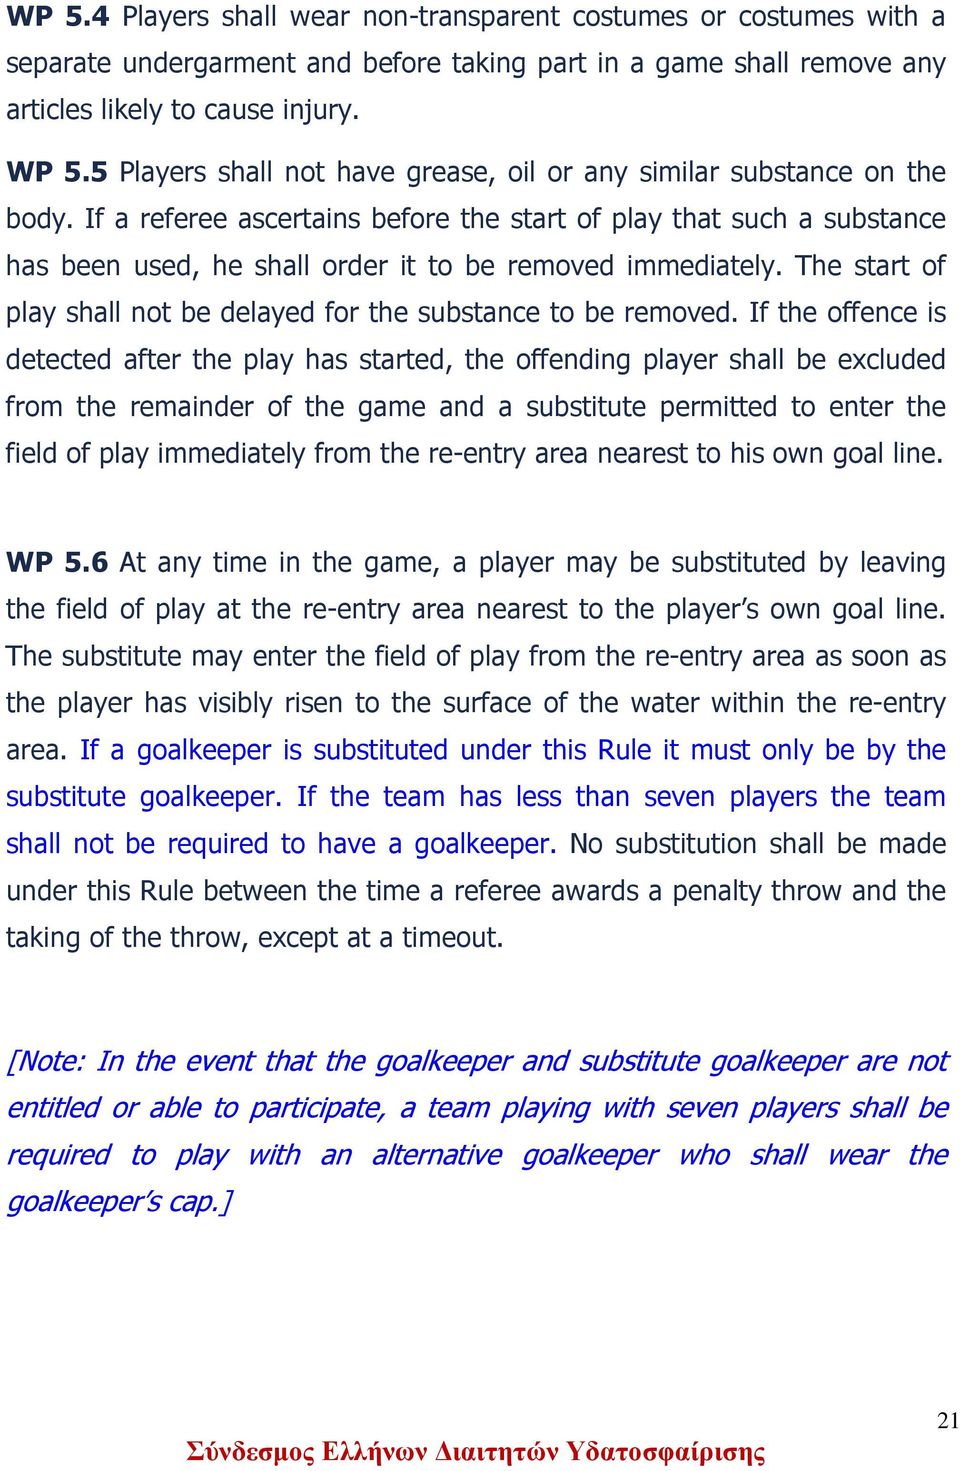 If a referee ascertains before the start of play that such a substance has been used, he shall order it to be removed immediately.